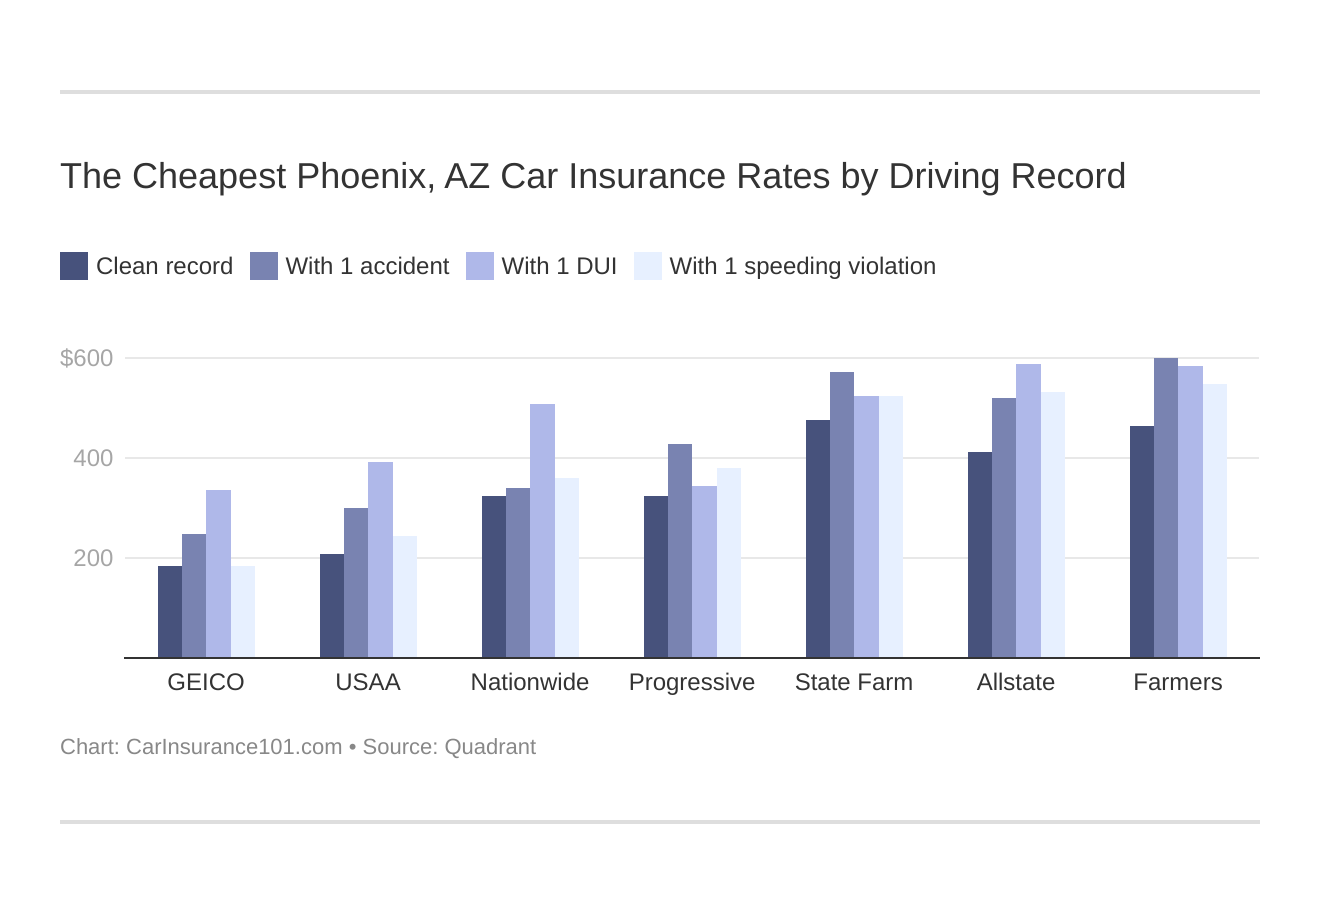 The Cheapest Phoenix, AZ Car Insurance Rates by Driving Record